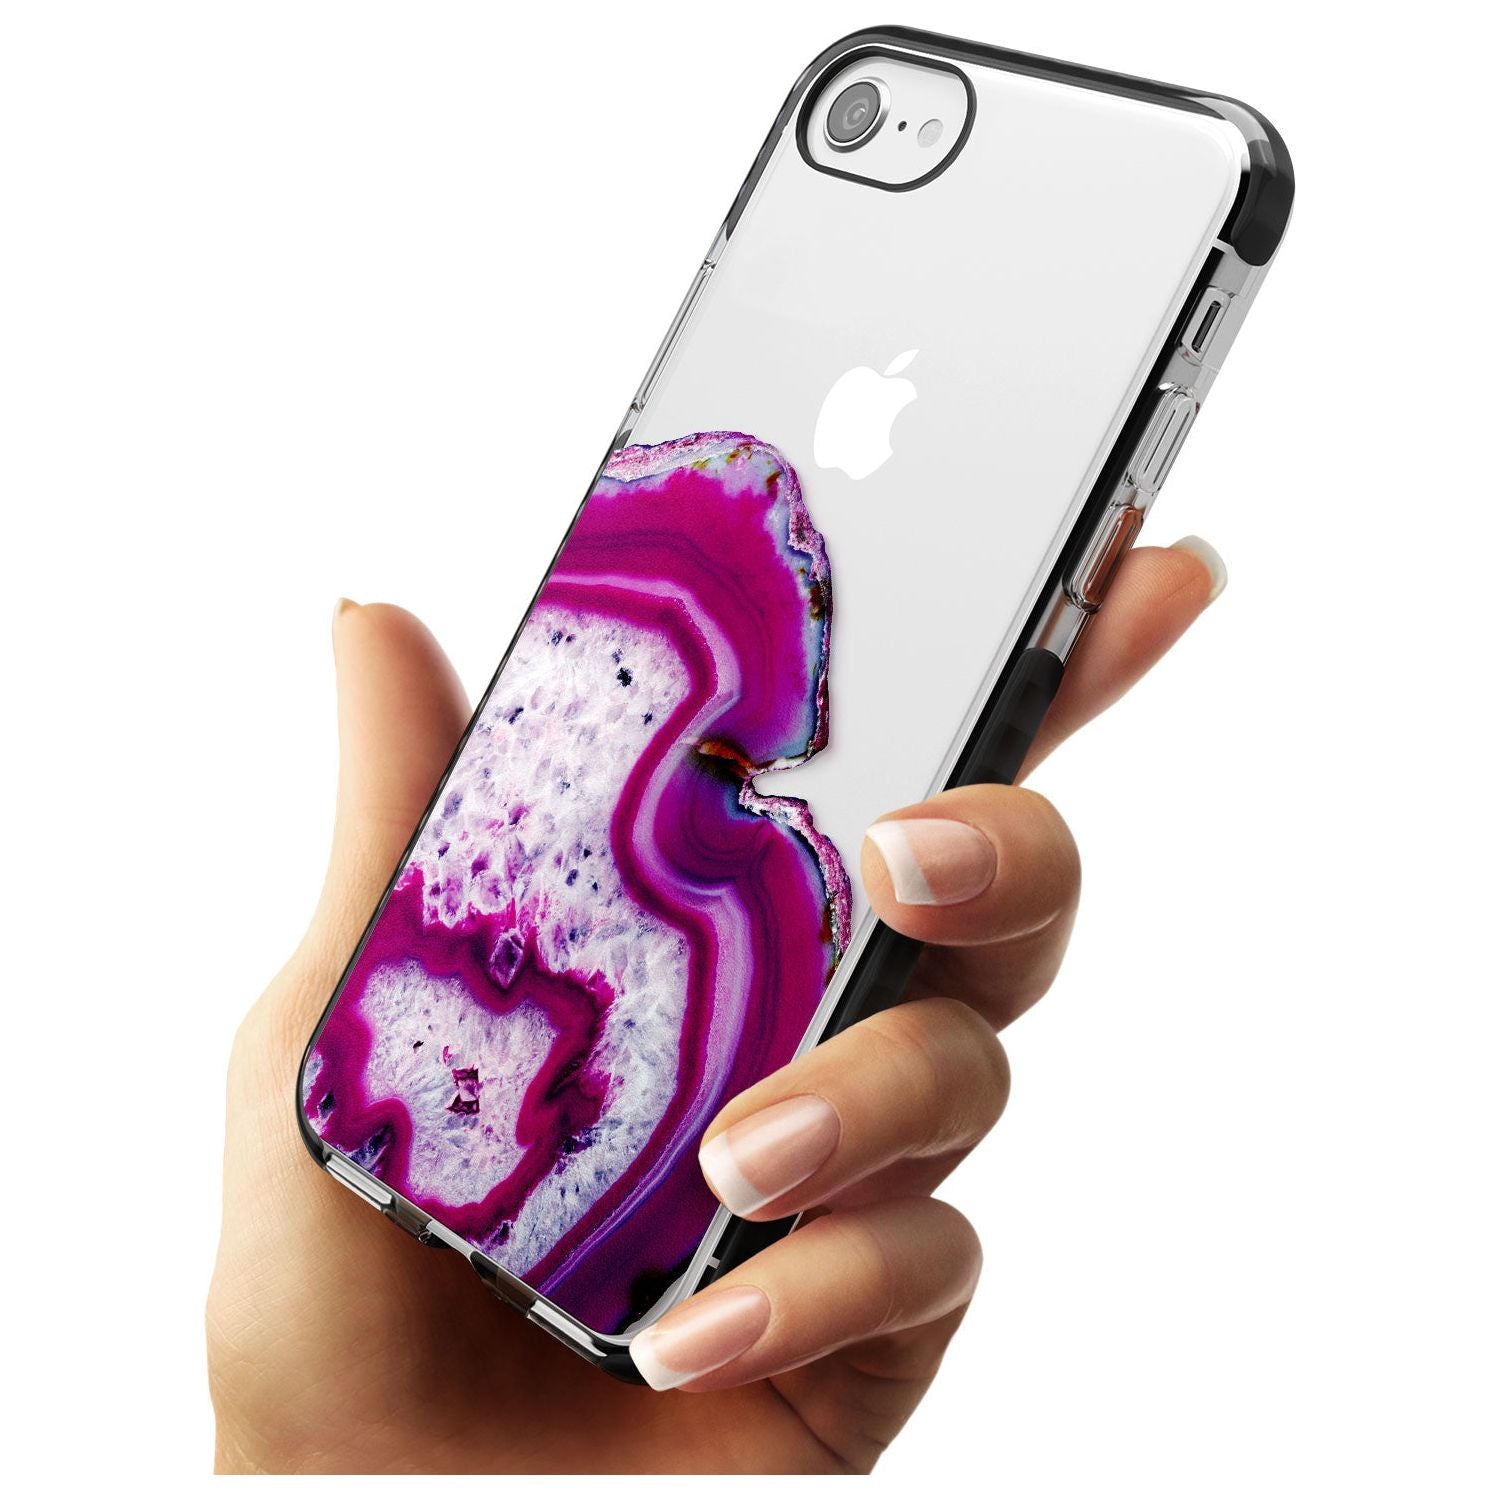 Violet & White Swirl Agate Crystal Clear Design Black Impact Phone Case for iPhone SE 8 7 Plus